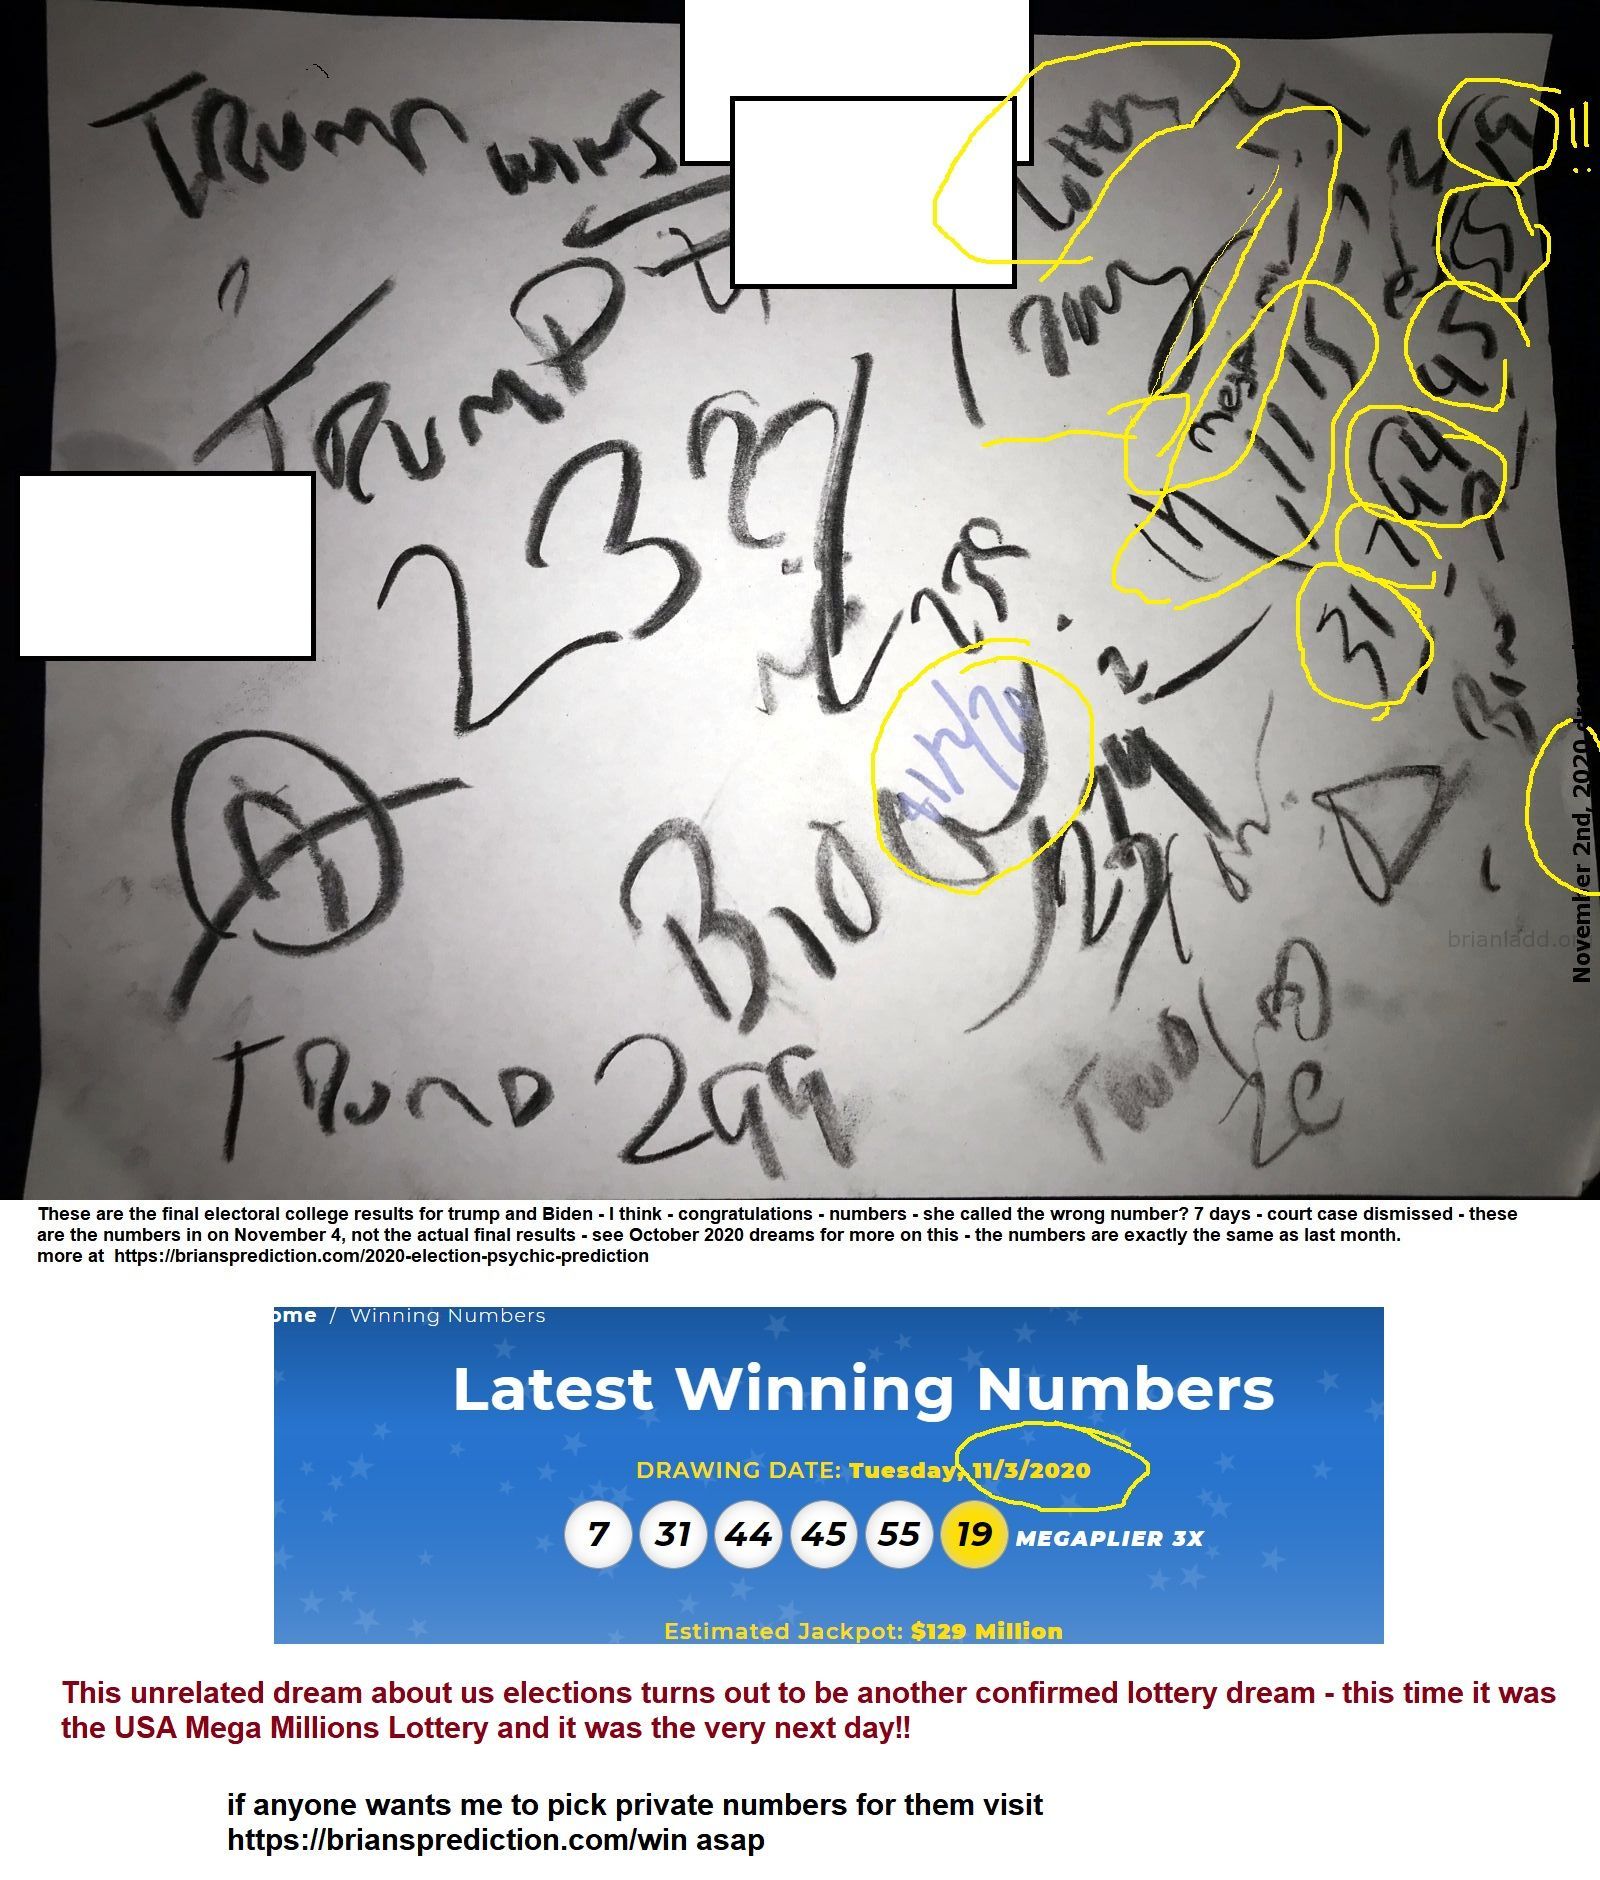 This Unrelated Dream About Us Elections Turns Out To Be Another Confirmed Lottery Dream This Time It Was The Usa Mega Mi...
This Unrelated Dream About Us Elections Turns Out To Be Another Confirmed Lottery Dream - This Time It Was The Usa Mega Millions Lottery And It Was The Very Next Day If Anyone Wants Me To Pick Private Numbers For Them Visit  https://briansprediction.com/Win Asap  ( NEW!  Free lottery picks by mail, I will personally fill out your blank lottery sheet and mail it back to you for free, postage is included!  visit  https://briansprediction.com/picksbymail   )
